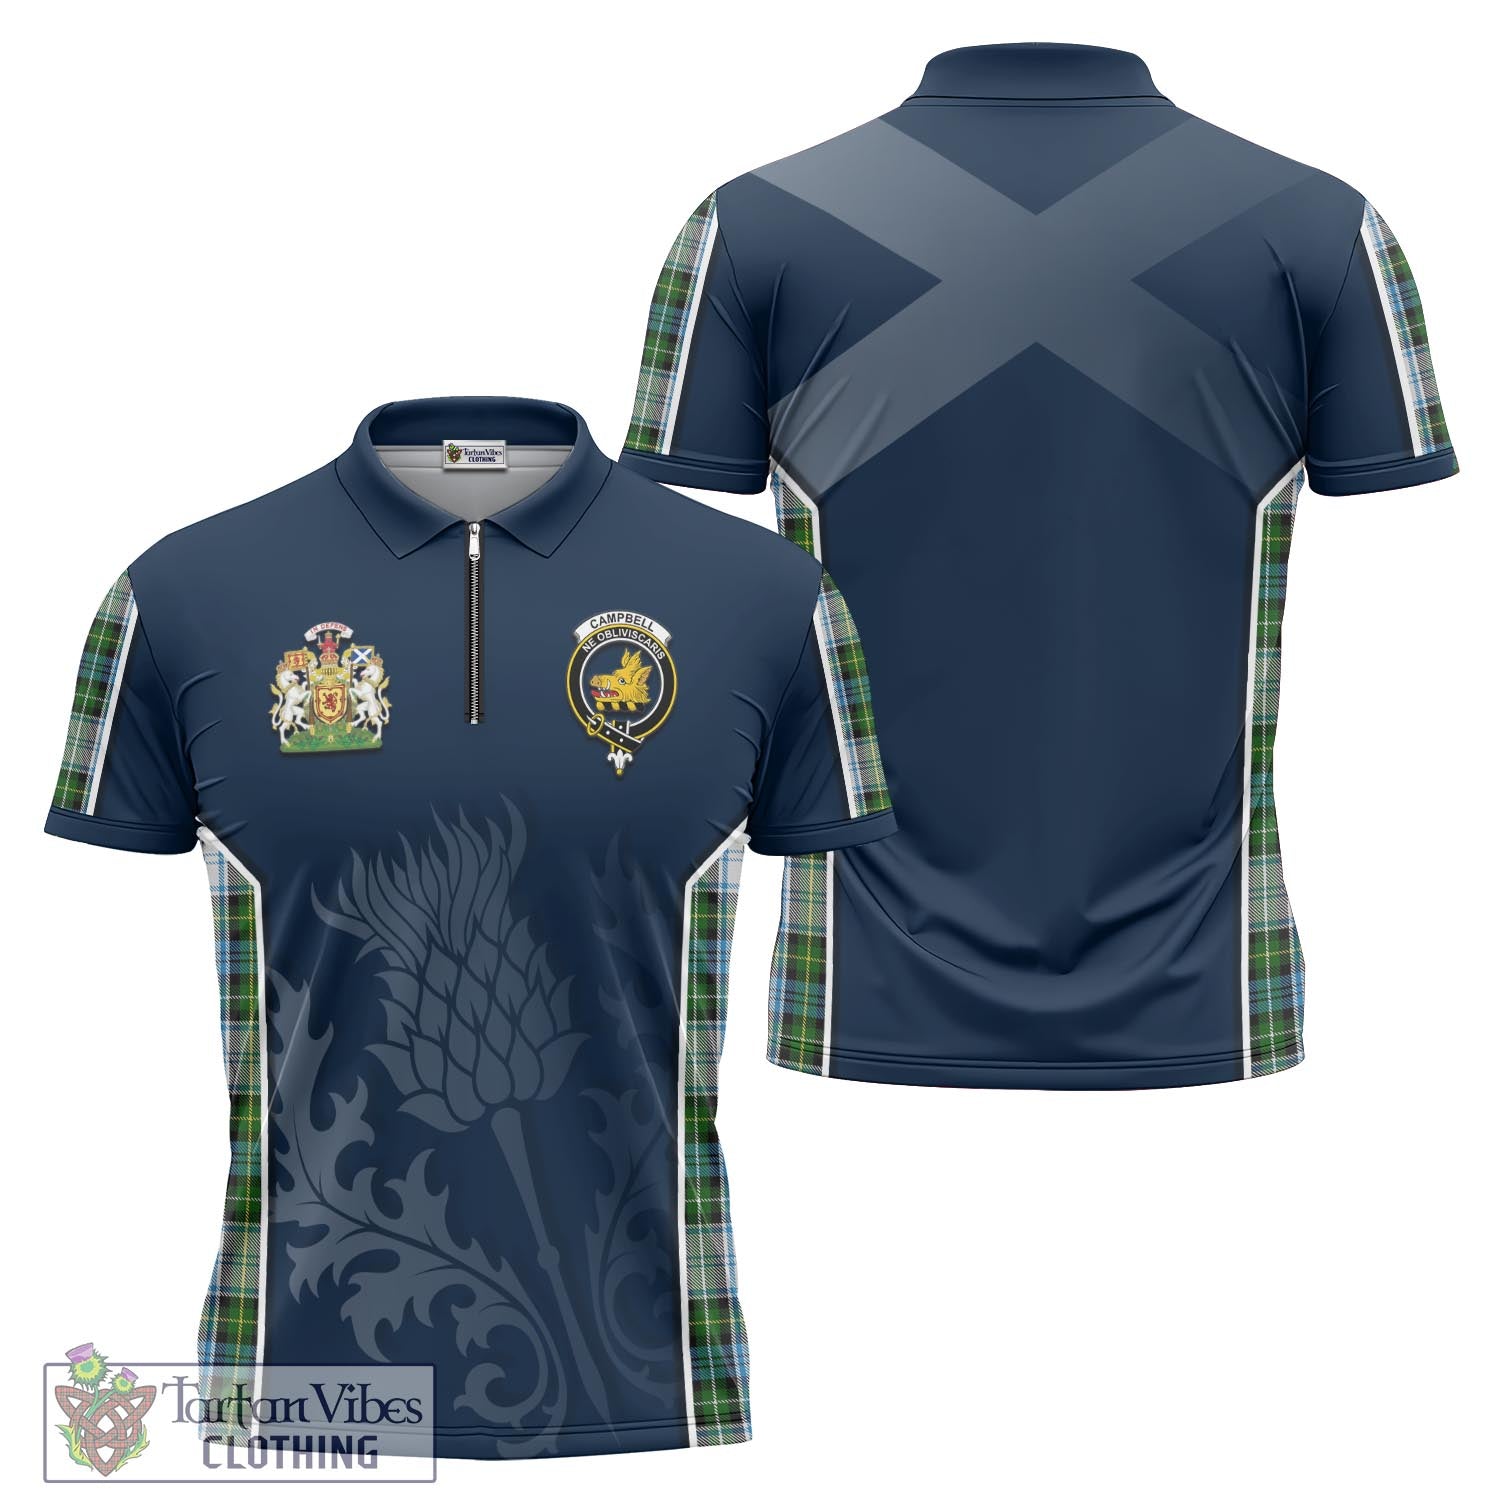 Tartan Vibes Clothing Campbell Dress Tartan Zipper Polo Shirt with Family Crest and Scottish Thistle Vibes Sport Style